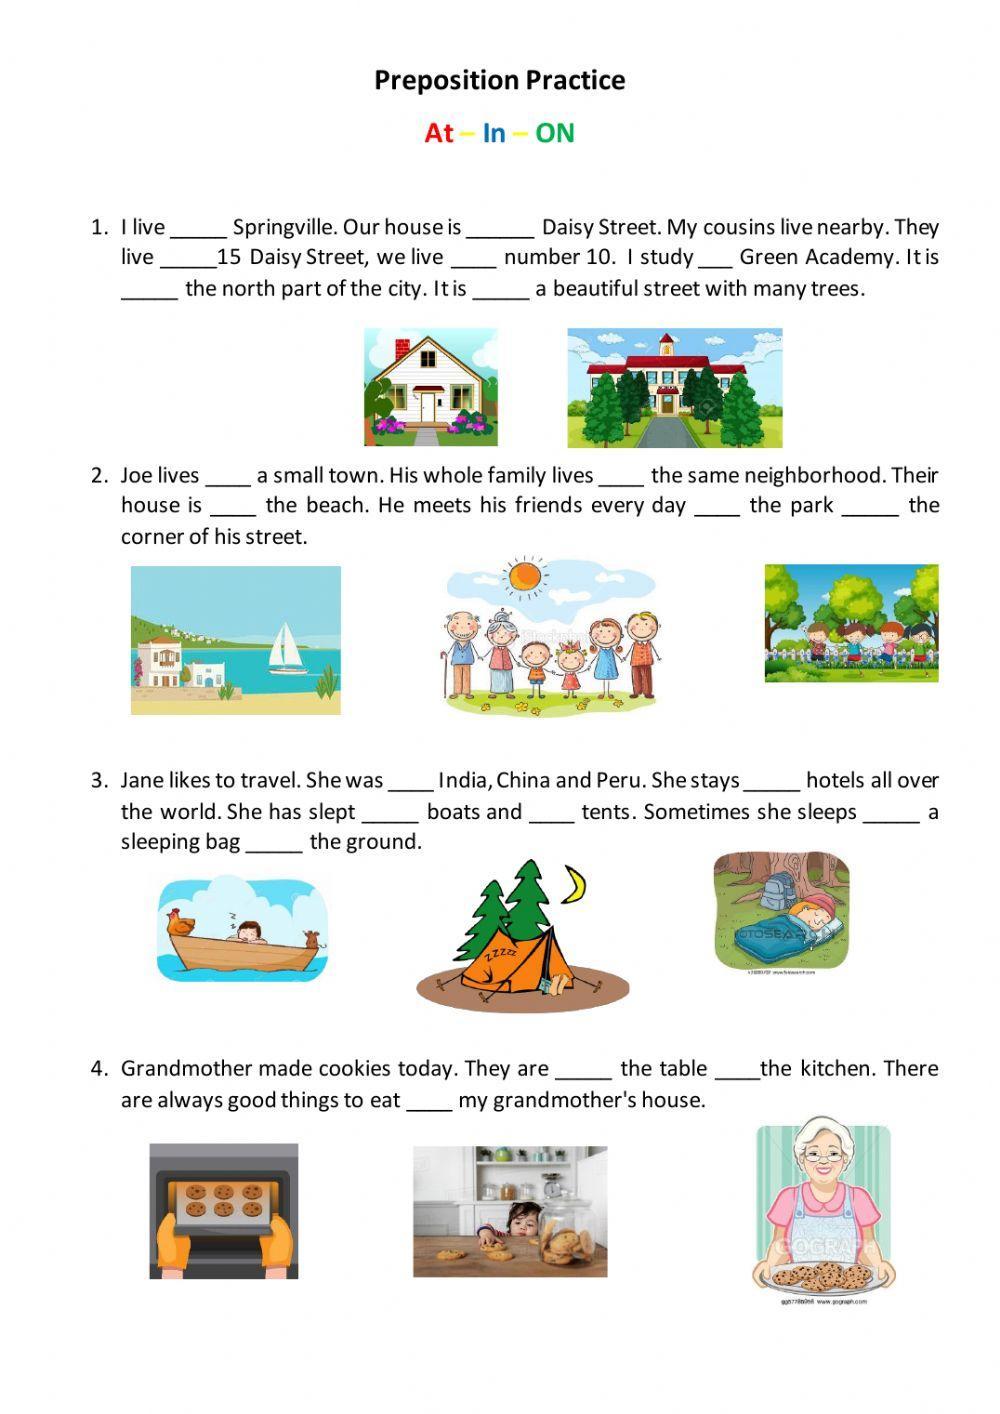 Place Prepositions (at,in,on)